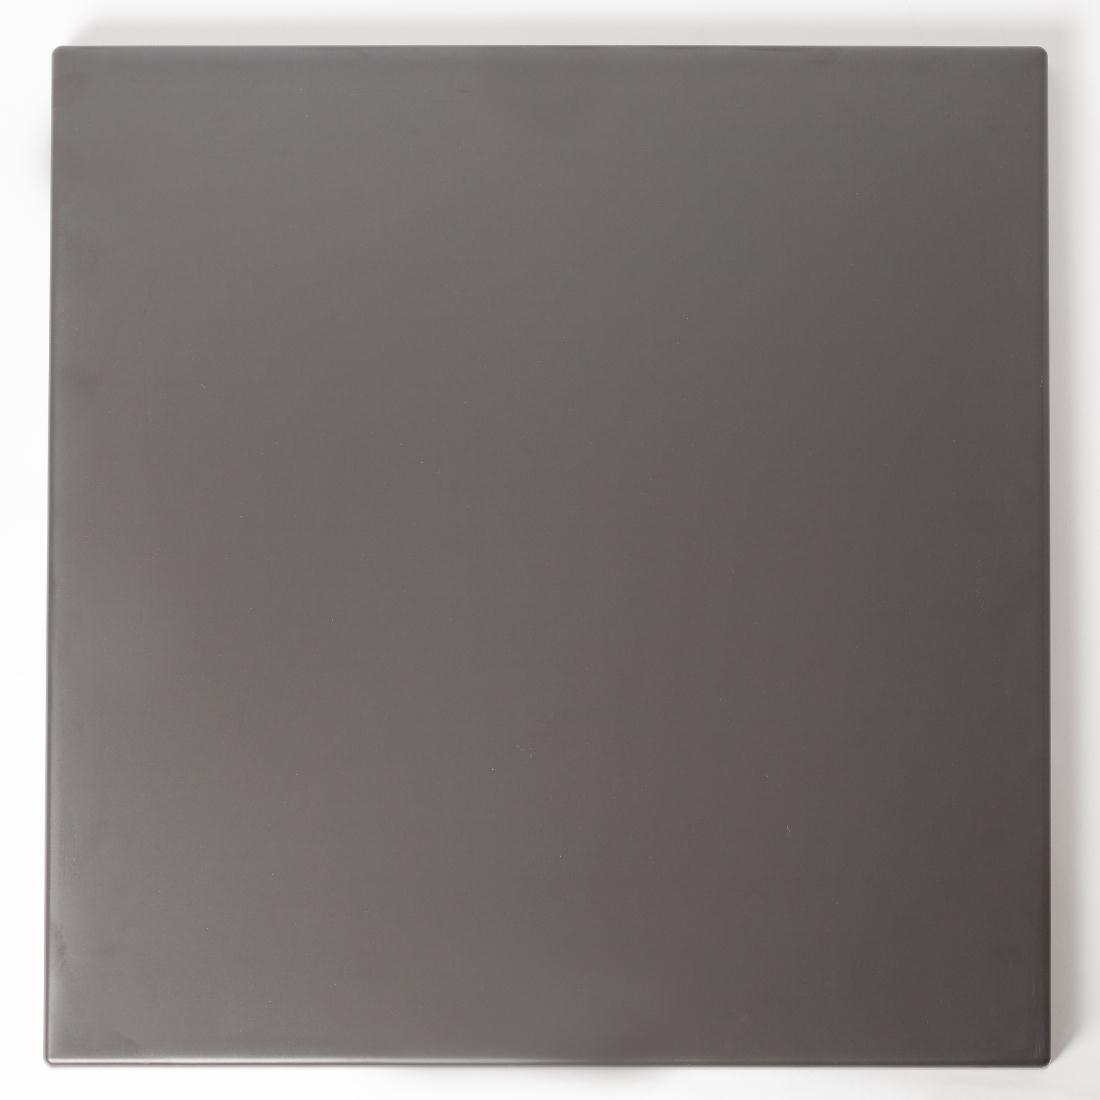 Werzalit Pre-drilled Square Table Top  Dark Grey 800mm